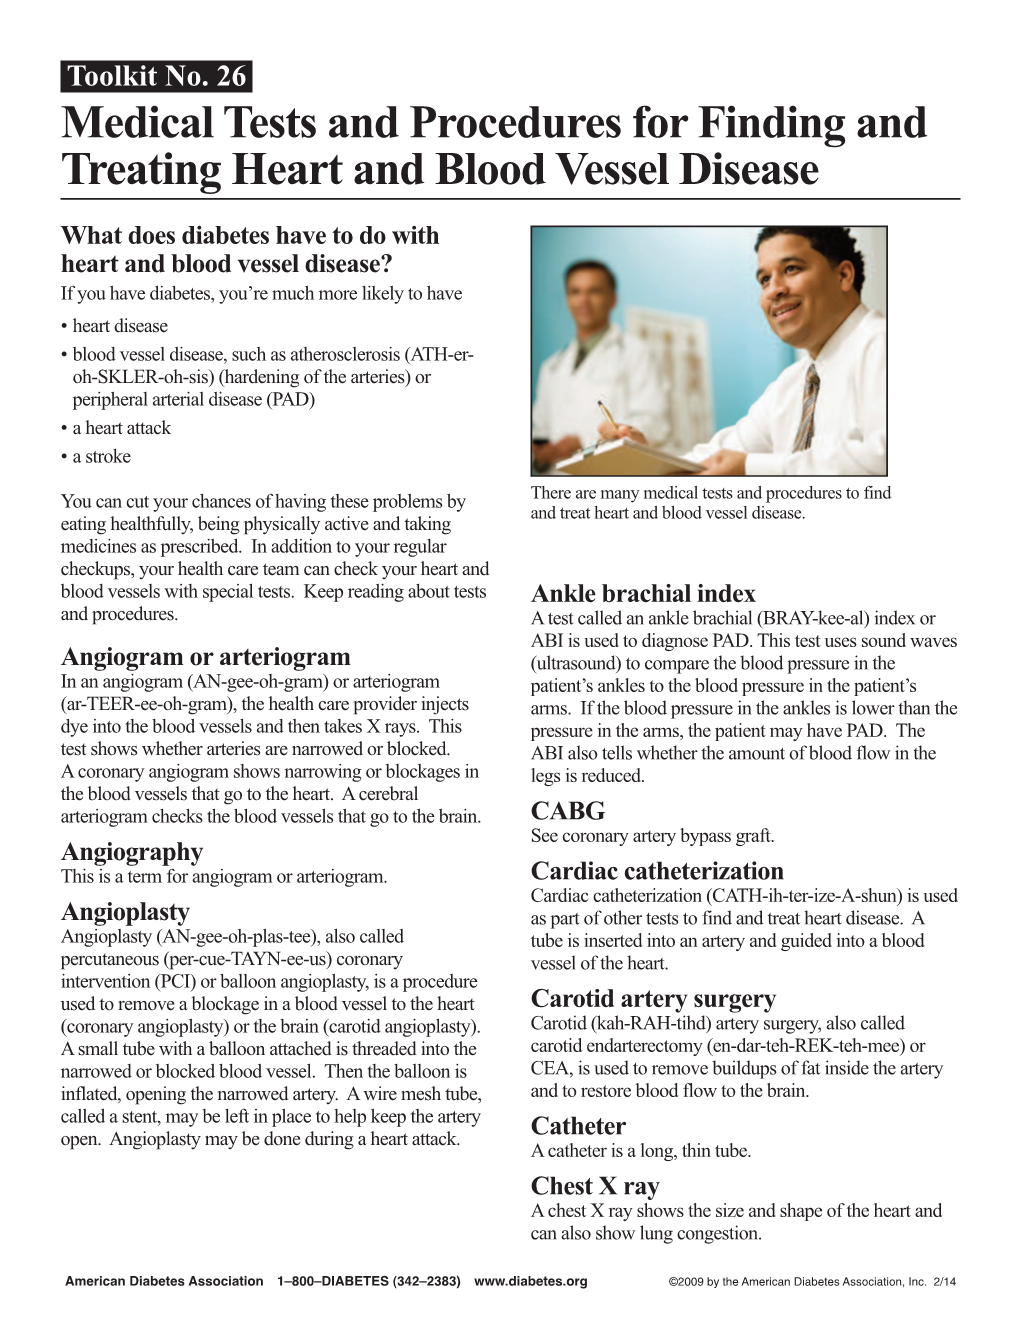 Medical Tests and Procedures for Finding and Treating Heart and Blood Vessel Disease